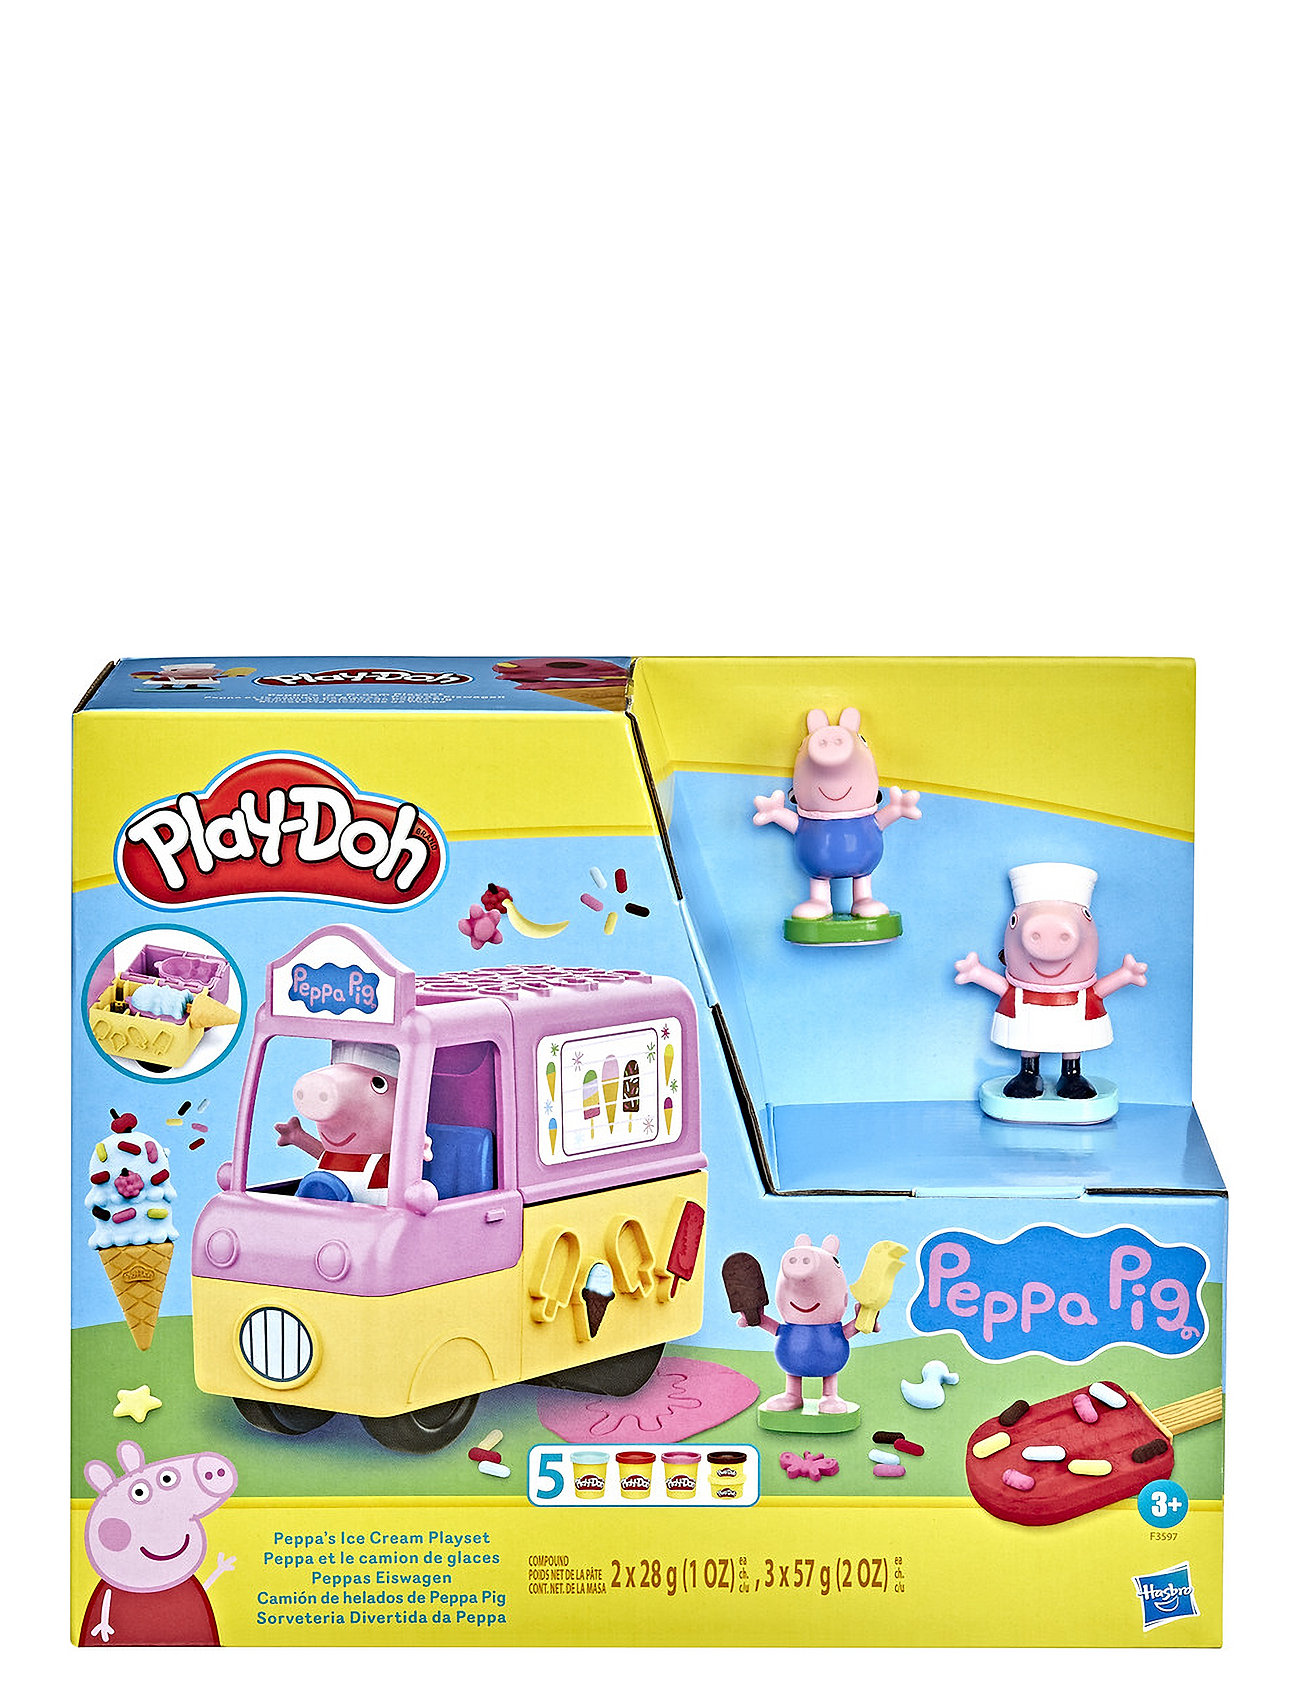 Peppa's Ice Cream Playset With Ice Cream Truck, Peppa And George Figures Toys Creativity Drawing & Crafts Craft Play Dough Multi/patterned Play Doh